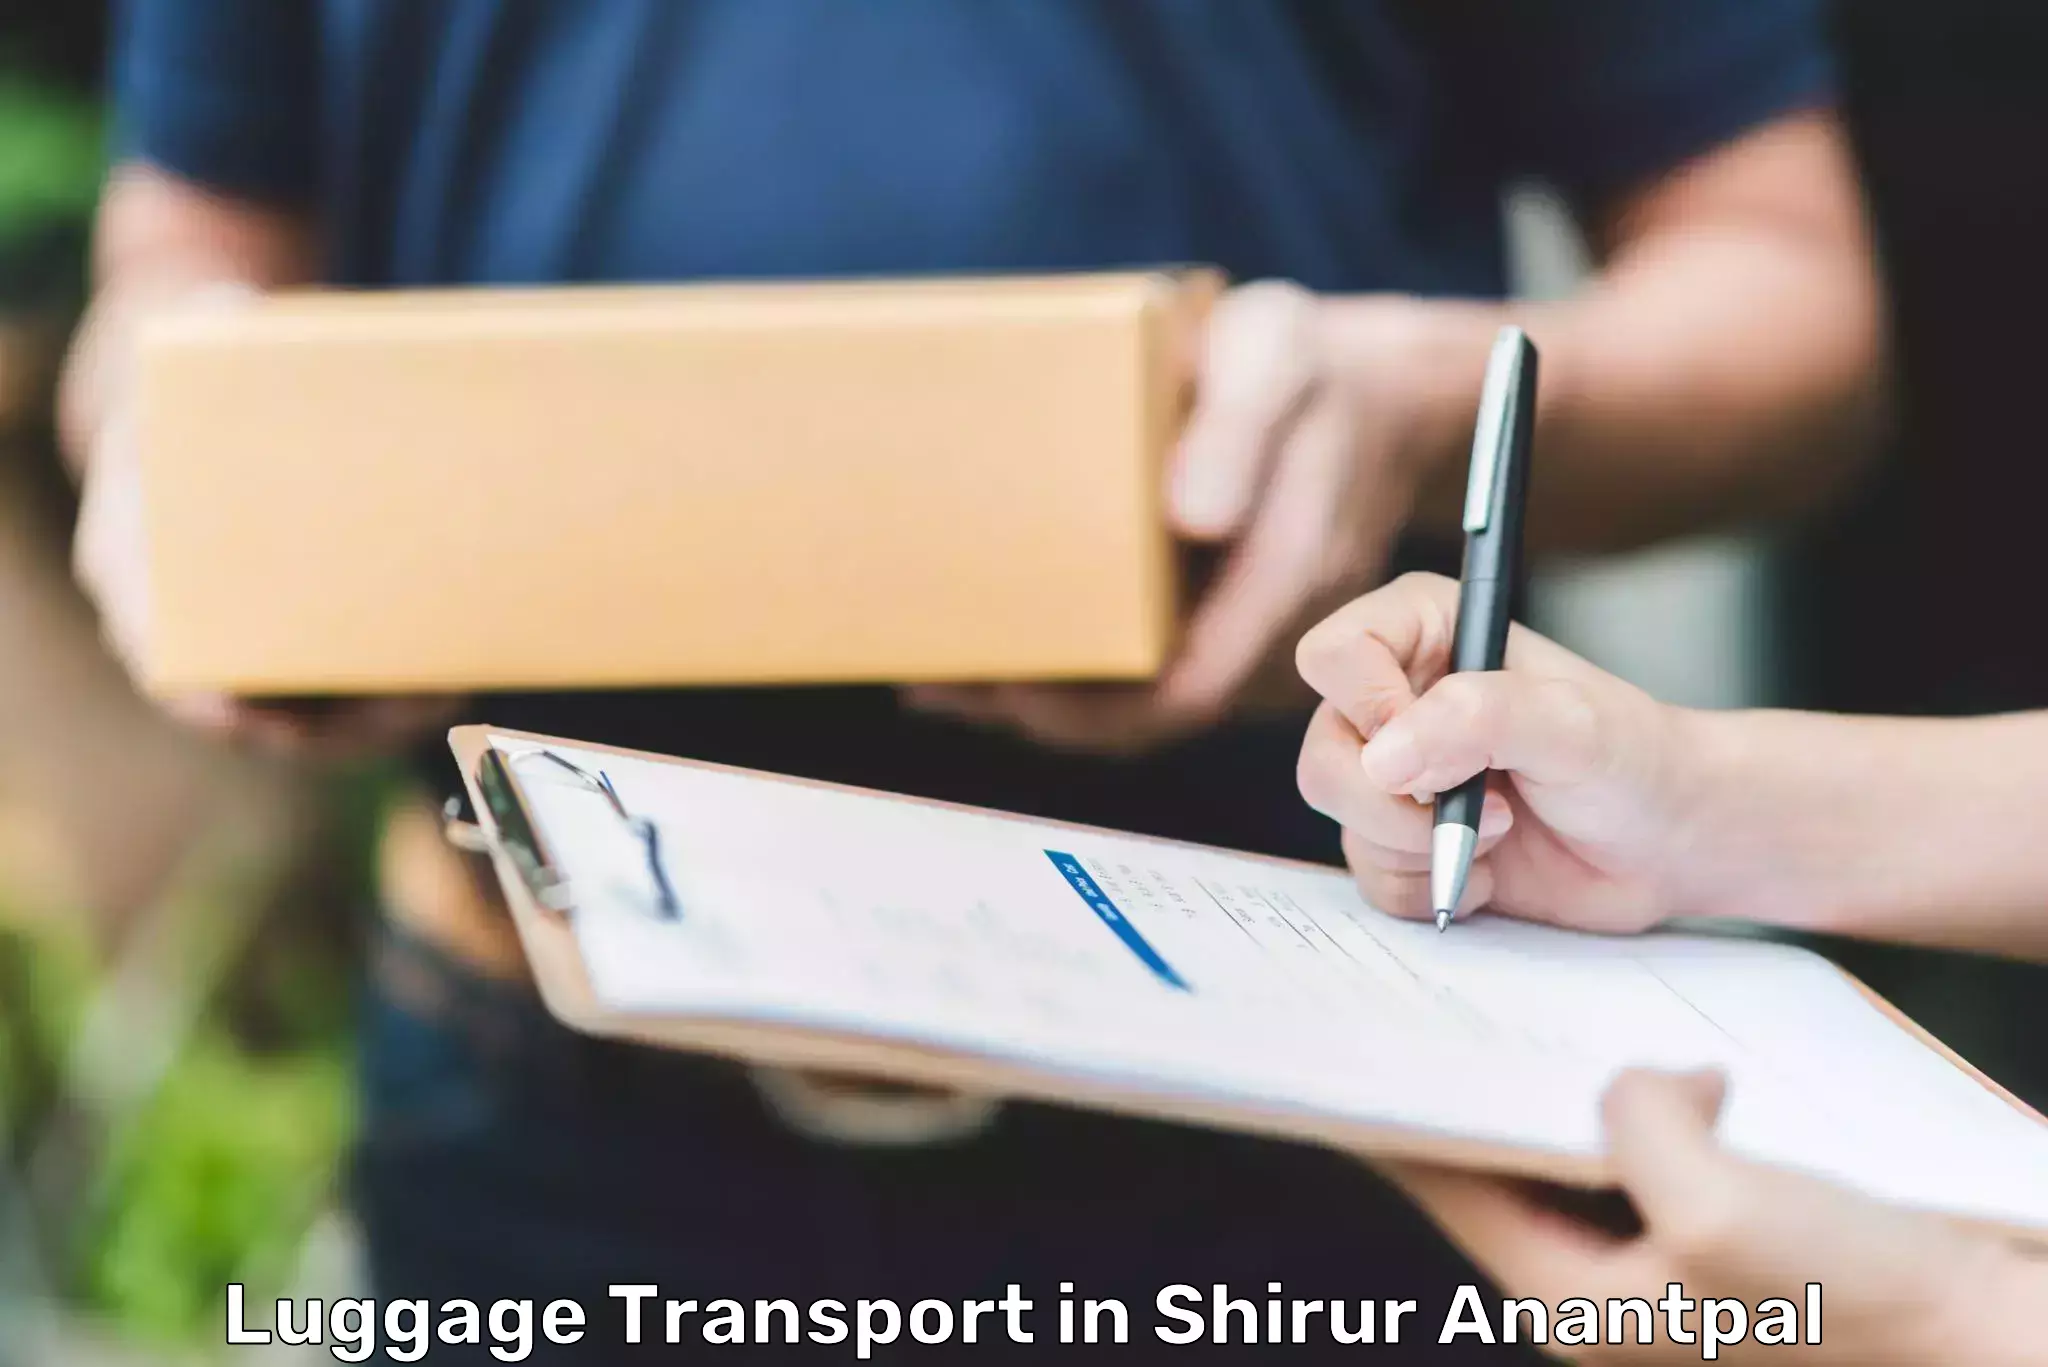 Doorstep luggage collection in Shirur Anantpal